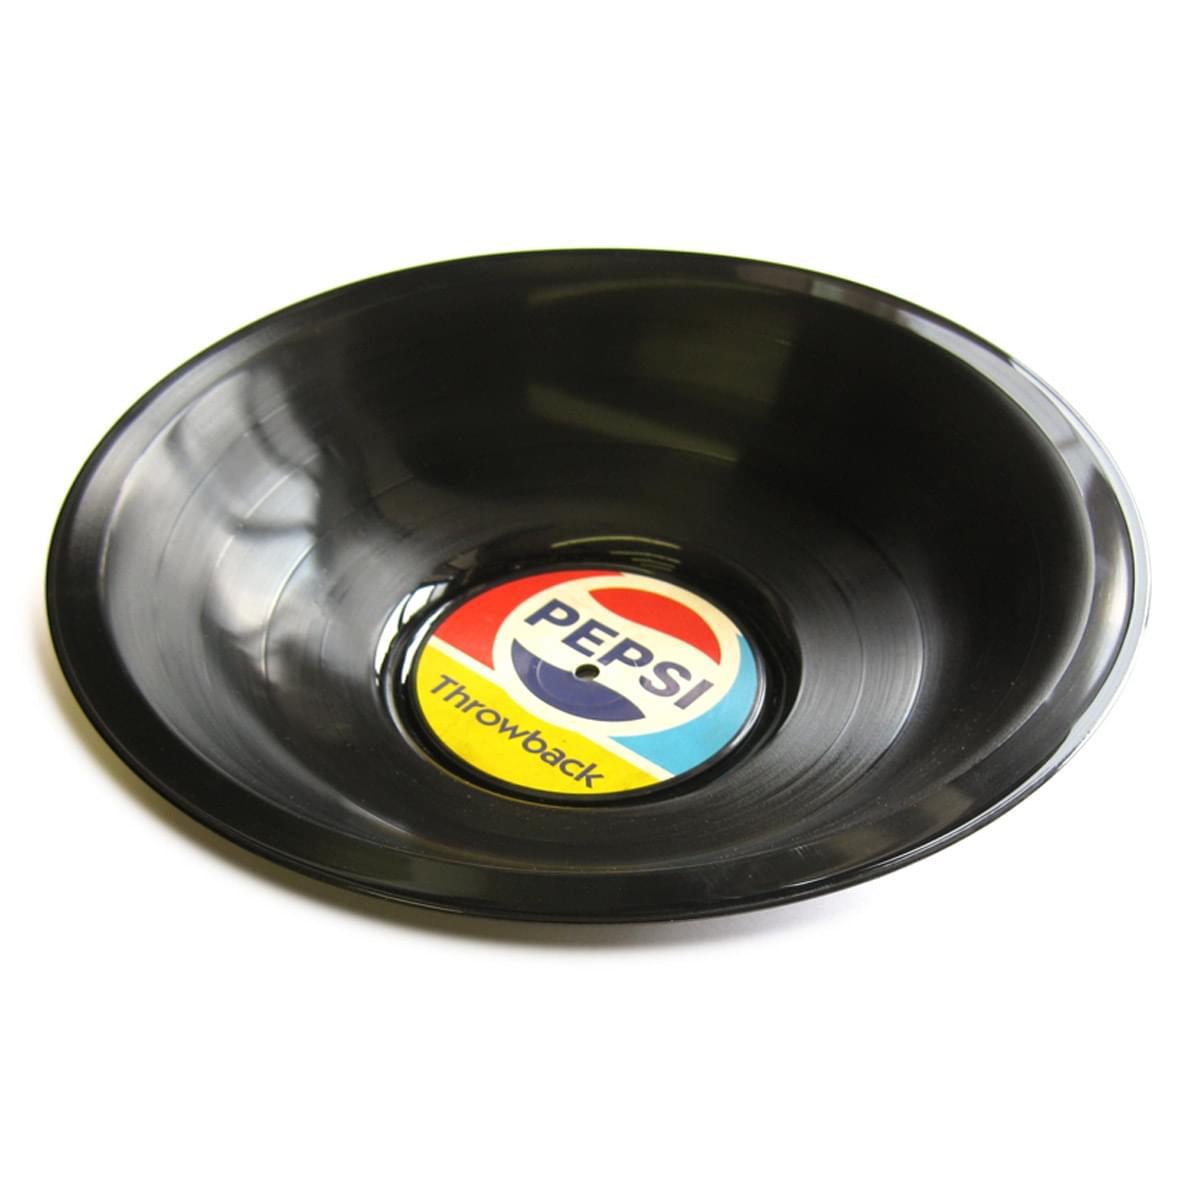 1-Sided Recycled Record Bowl